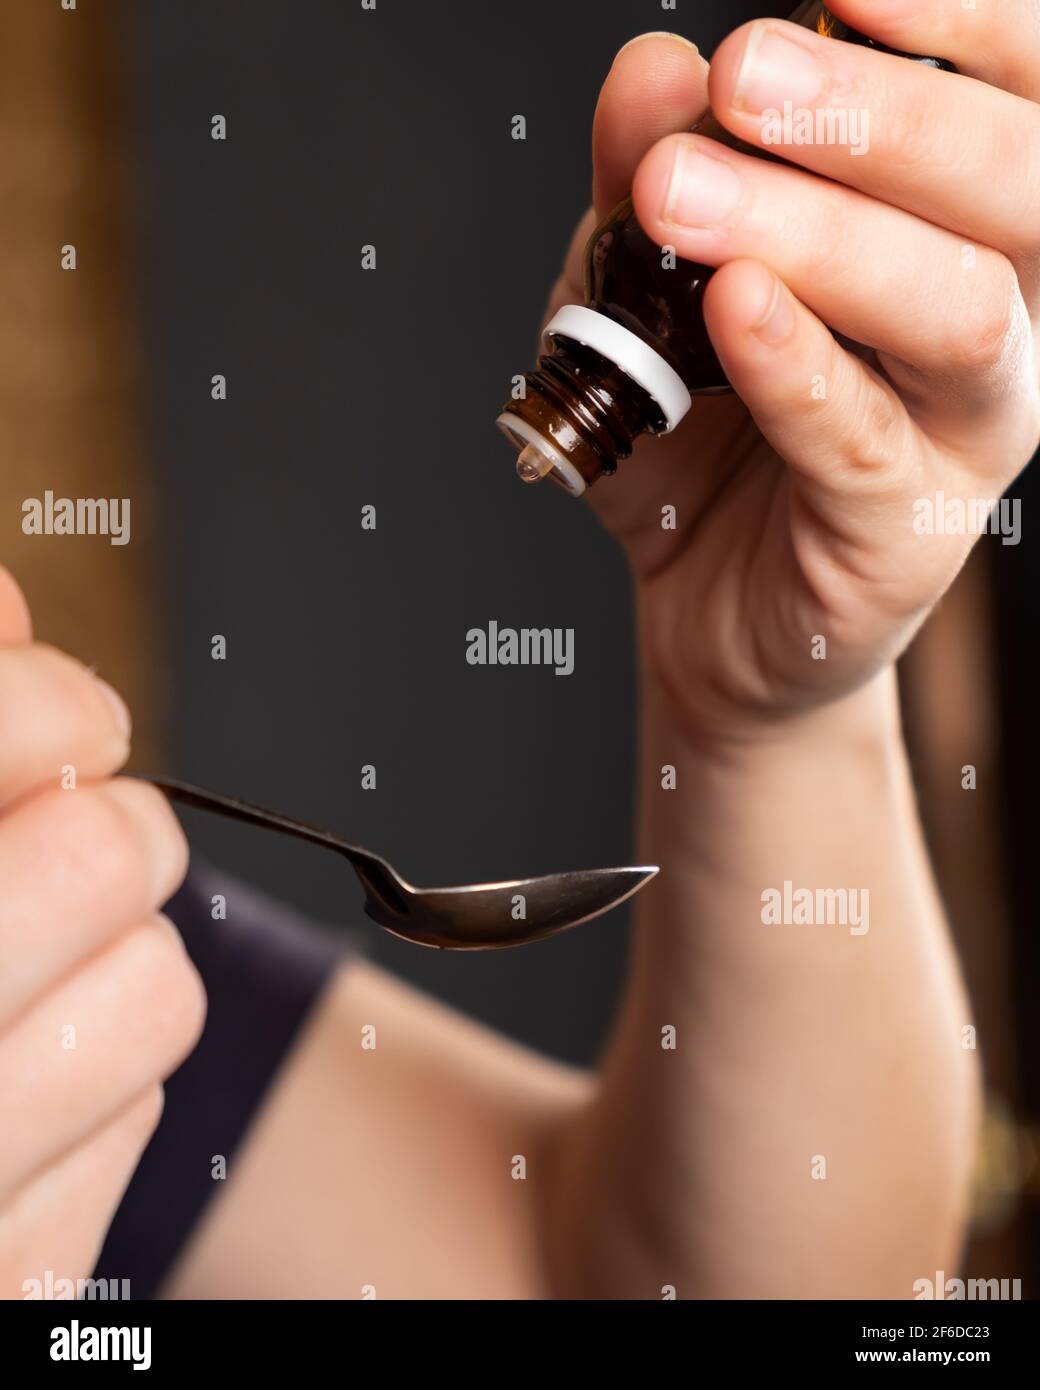 take medicine from a spoon,drip cough syrup Stock Photo